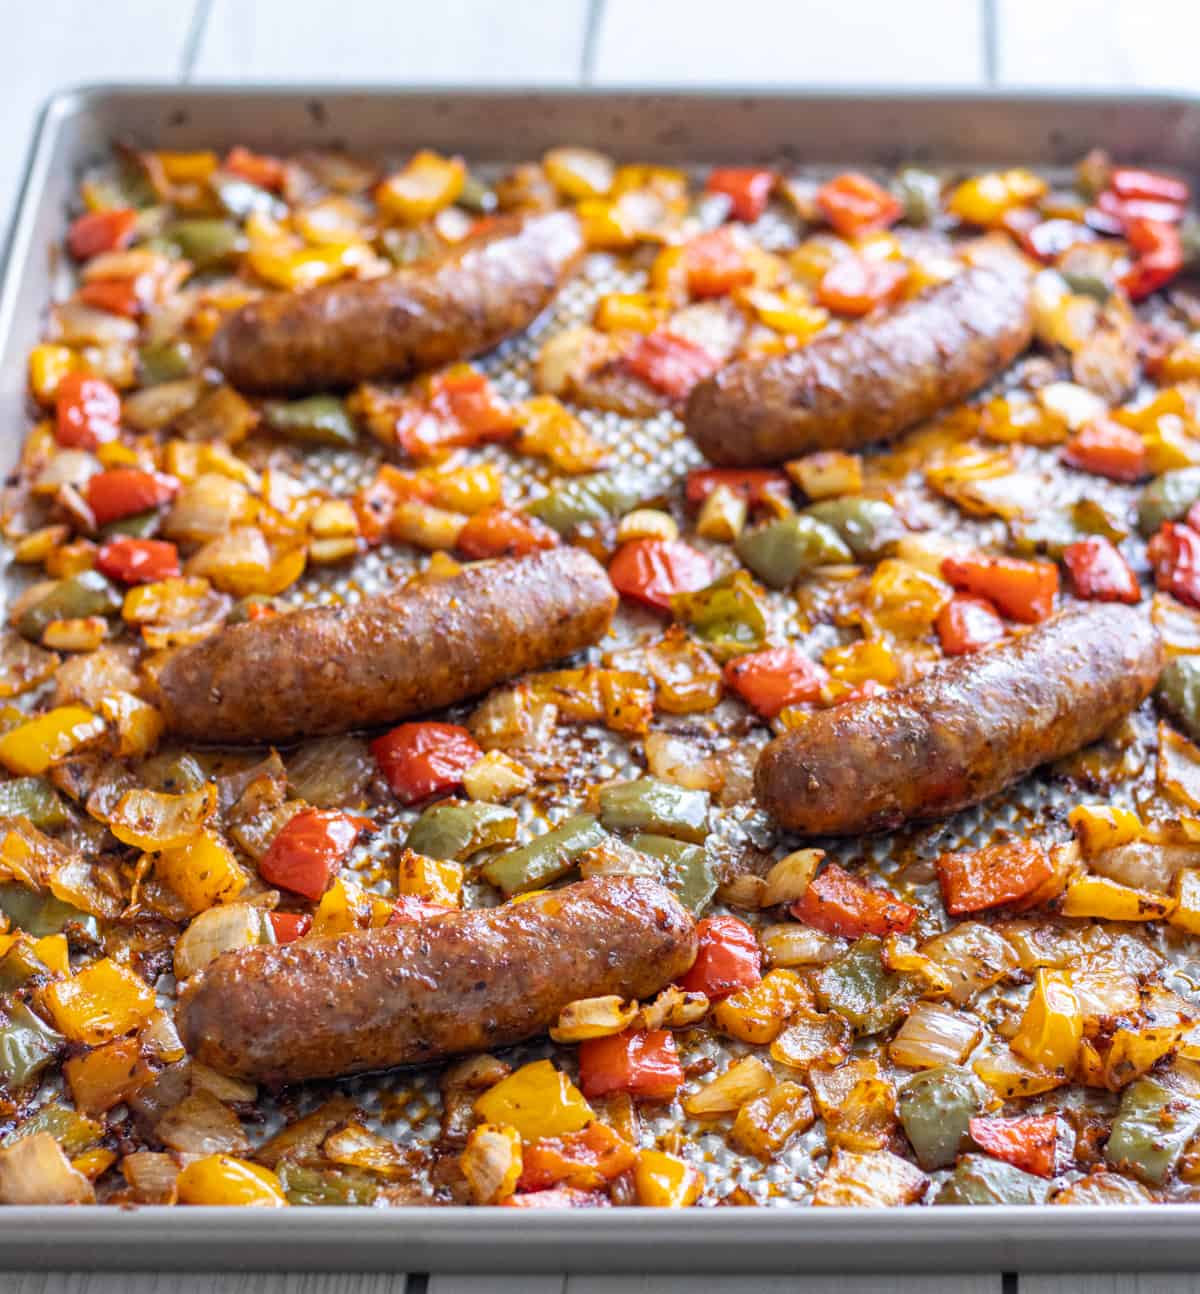 Italian sausages, bell peppers, and onions in a tomato sauce baked on a sheet pan.